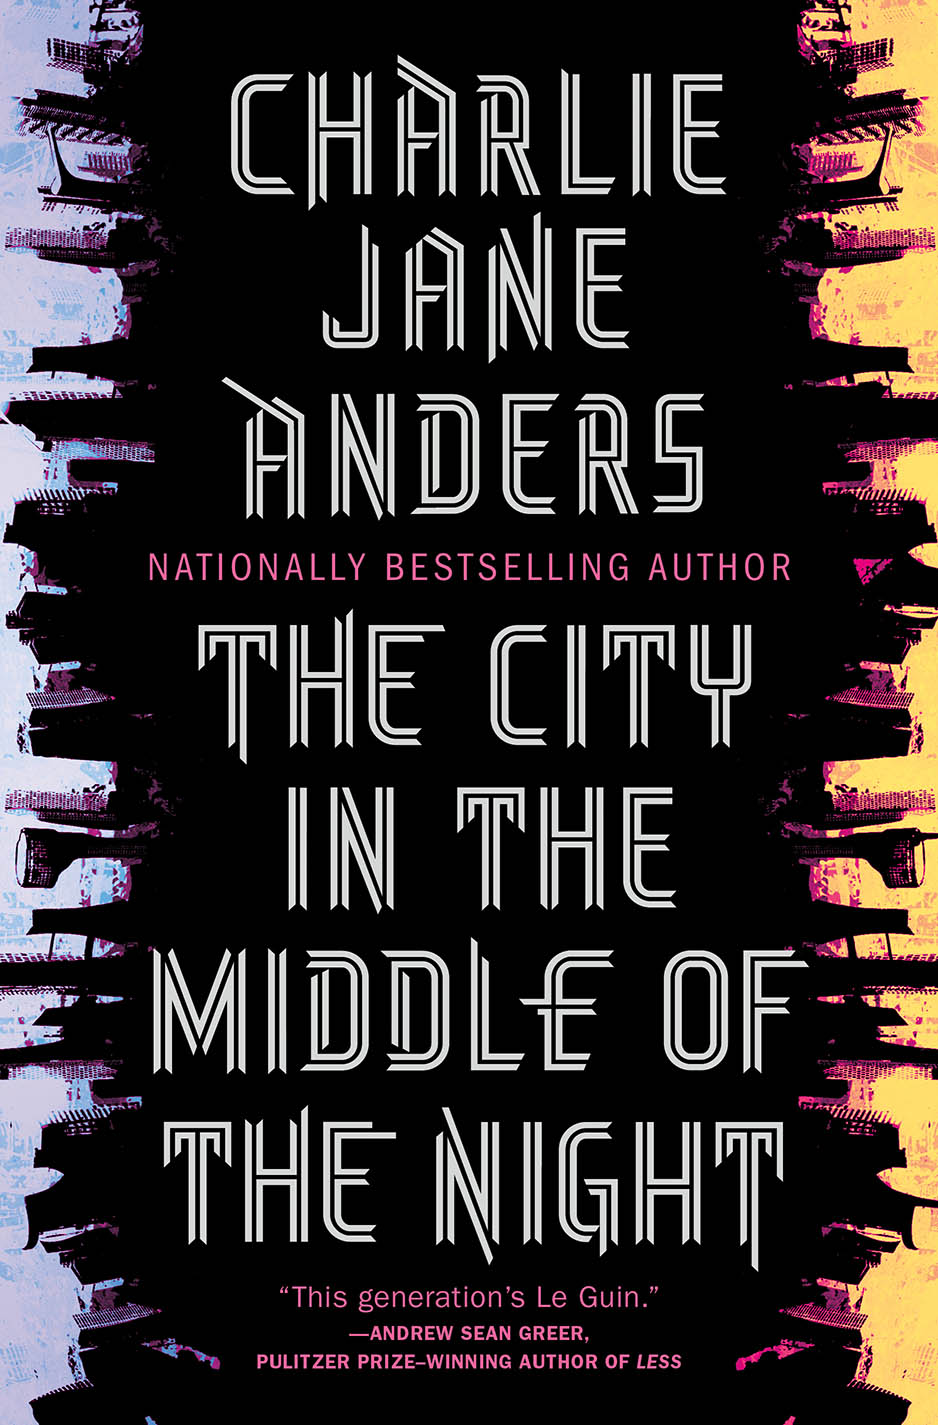 City in the Middle of the Night by Charlie Jane Anders book cover